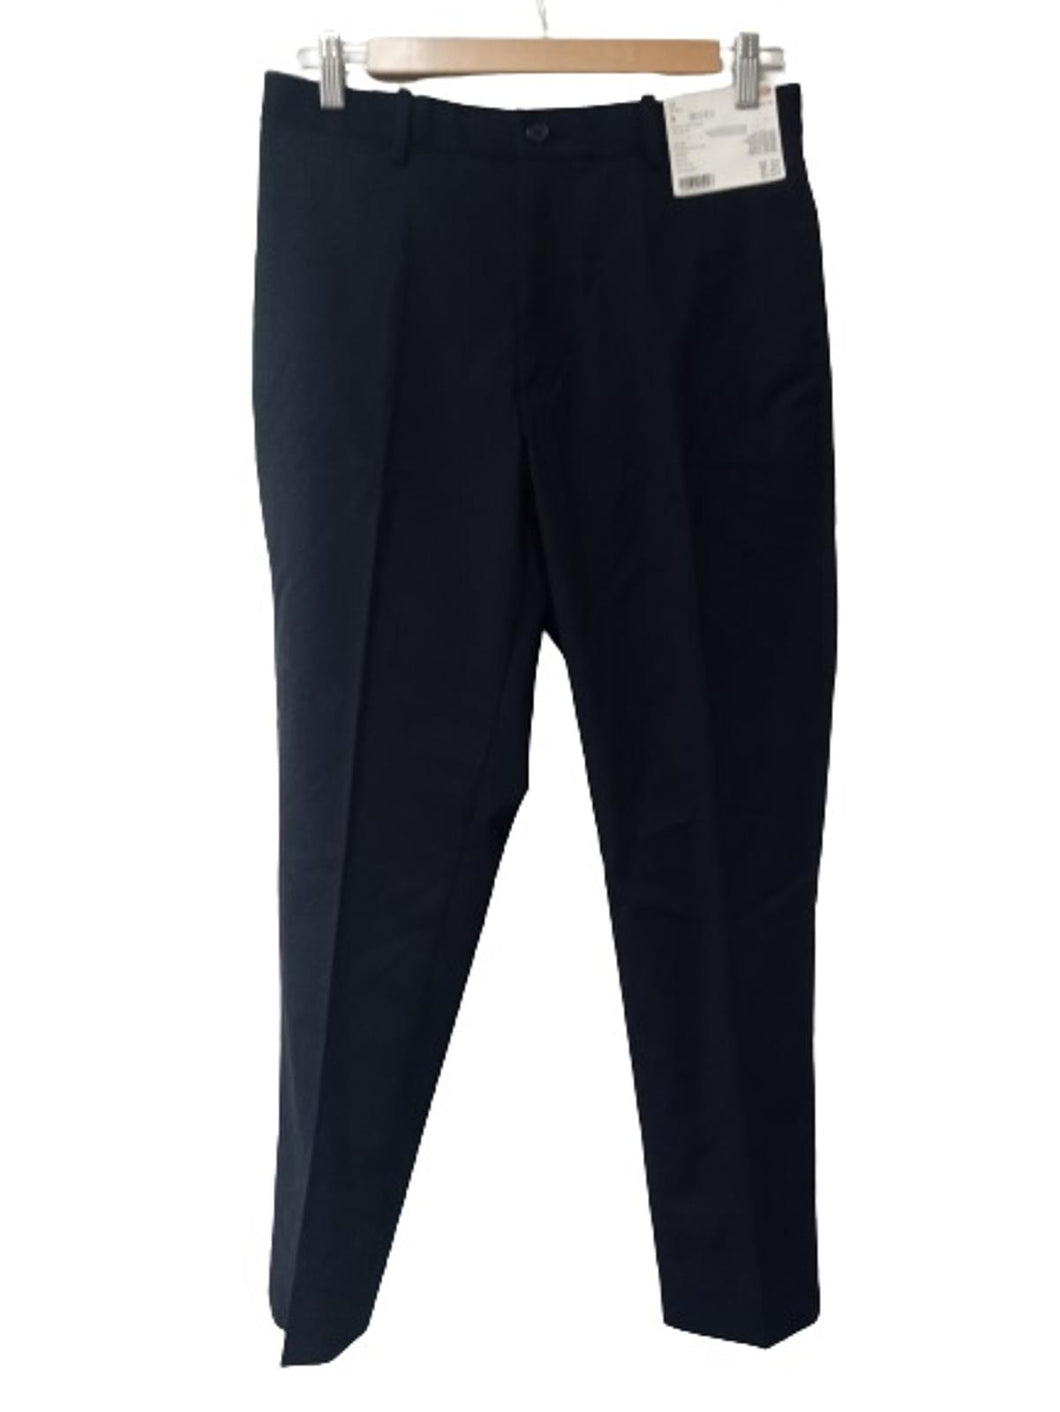 UNIQLO Men's Navy Blue Zip Fly Ezy Ankle Length Trousers Size UK S NEW